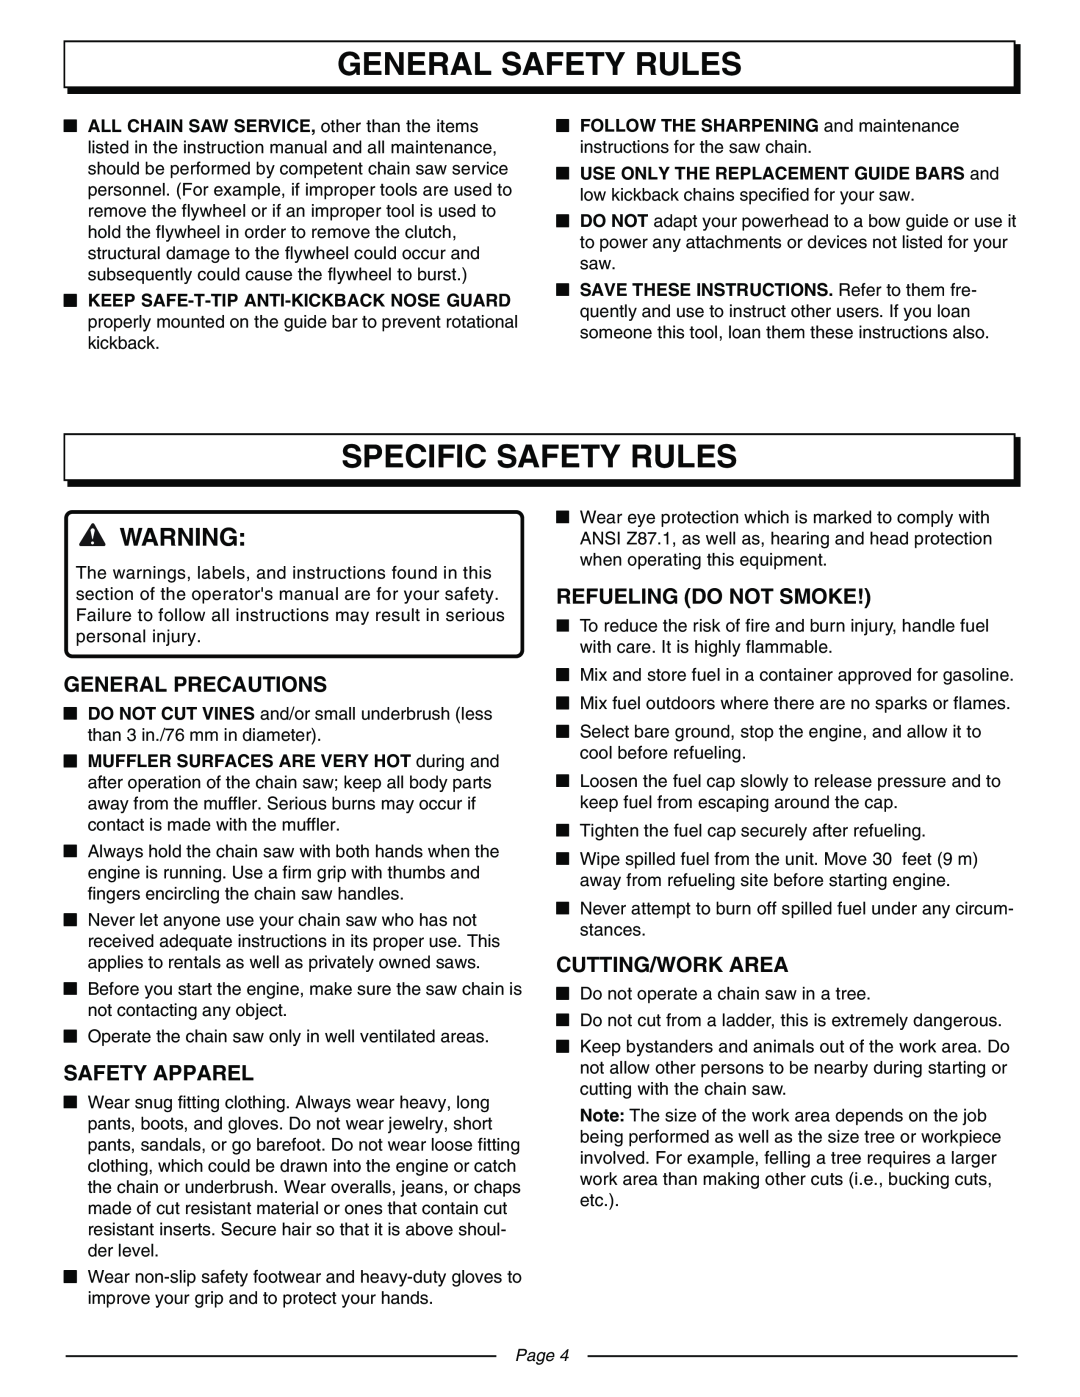 Homelite UT10942D Specific Safety Rules, General Precautions, Safety Apparel, Refueling Do Not Smoke, Cutting/Work Area 